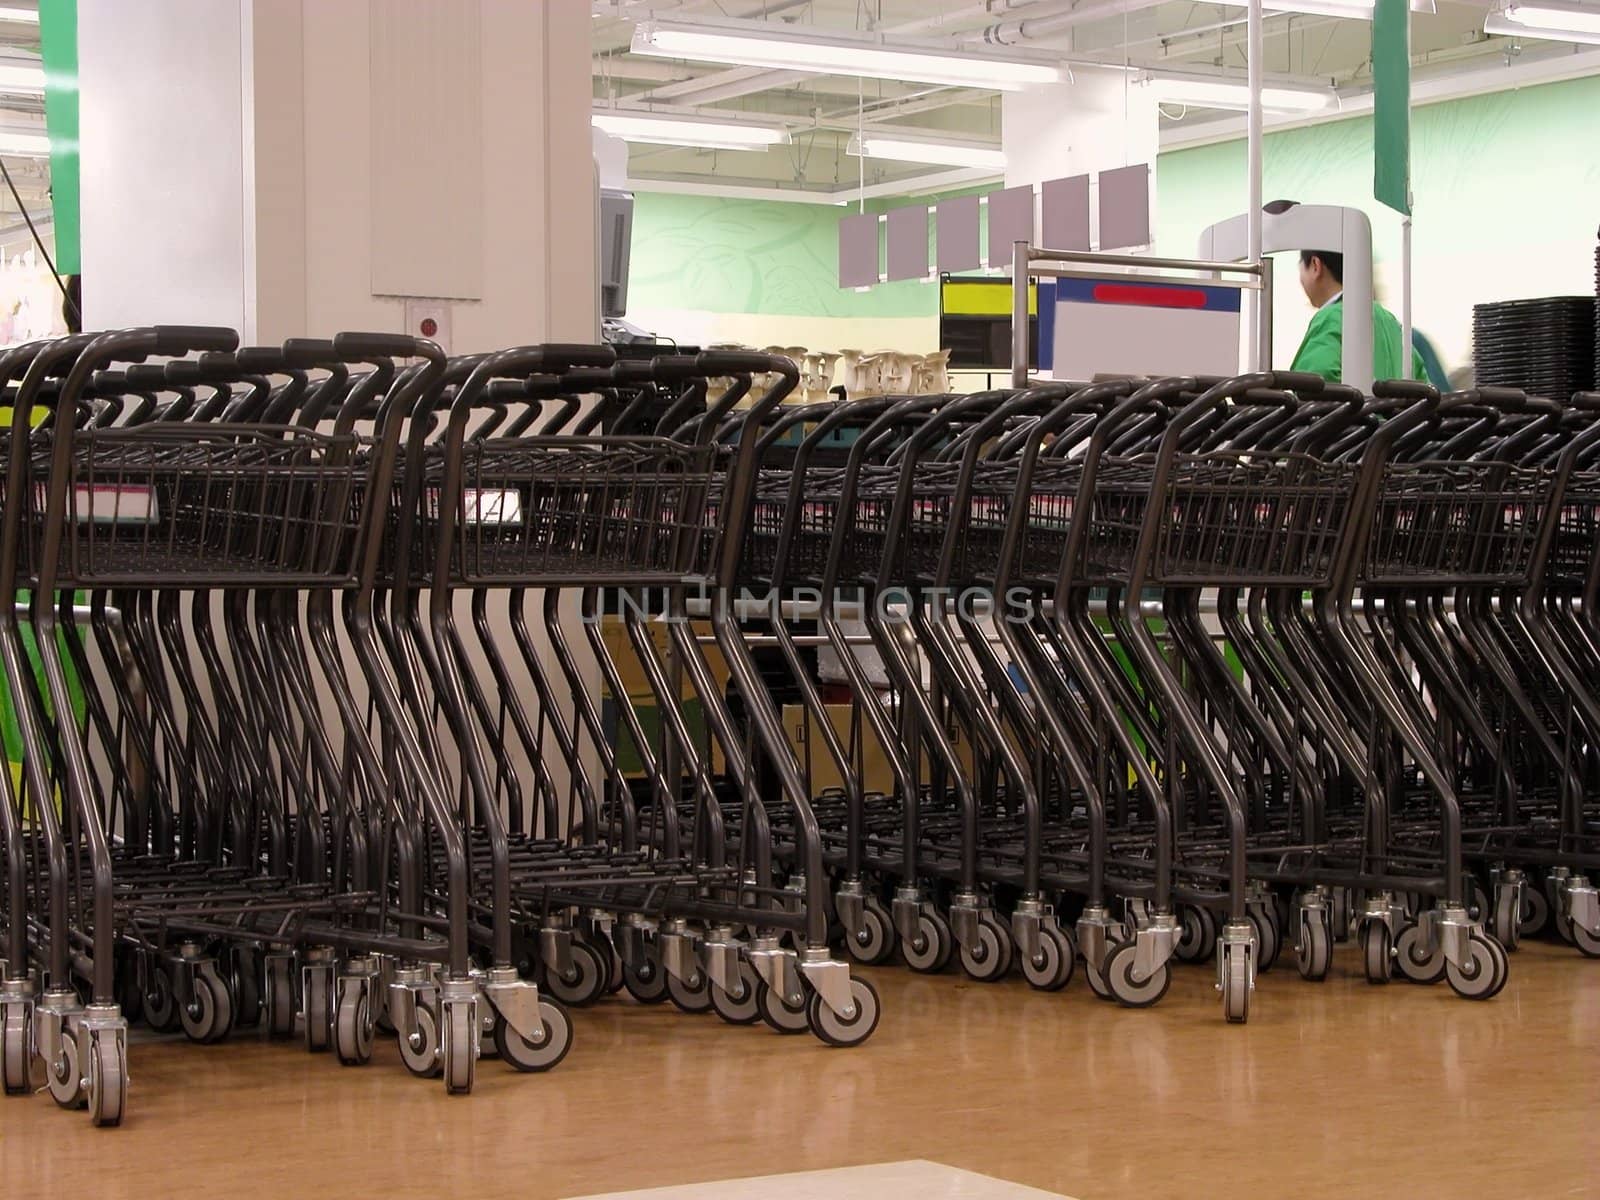 Aspect from a supermarket-shopping carts area          